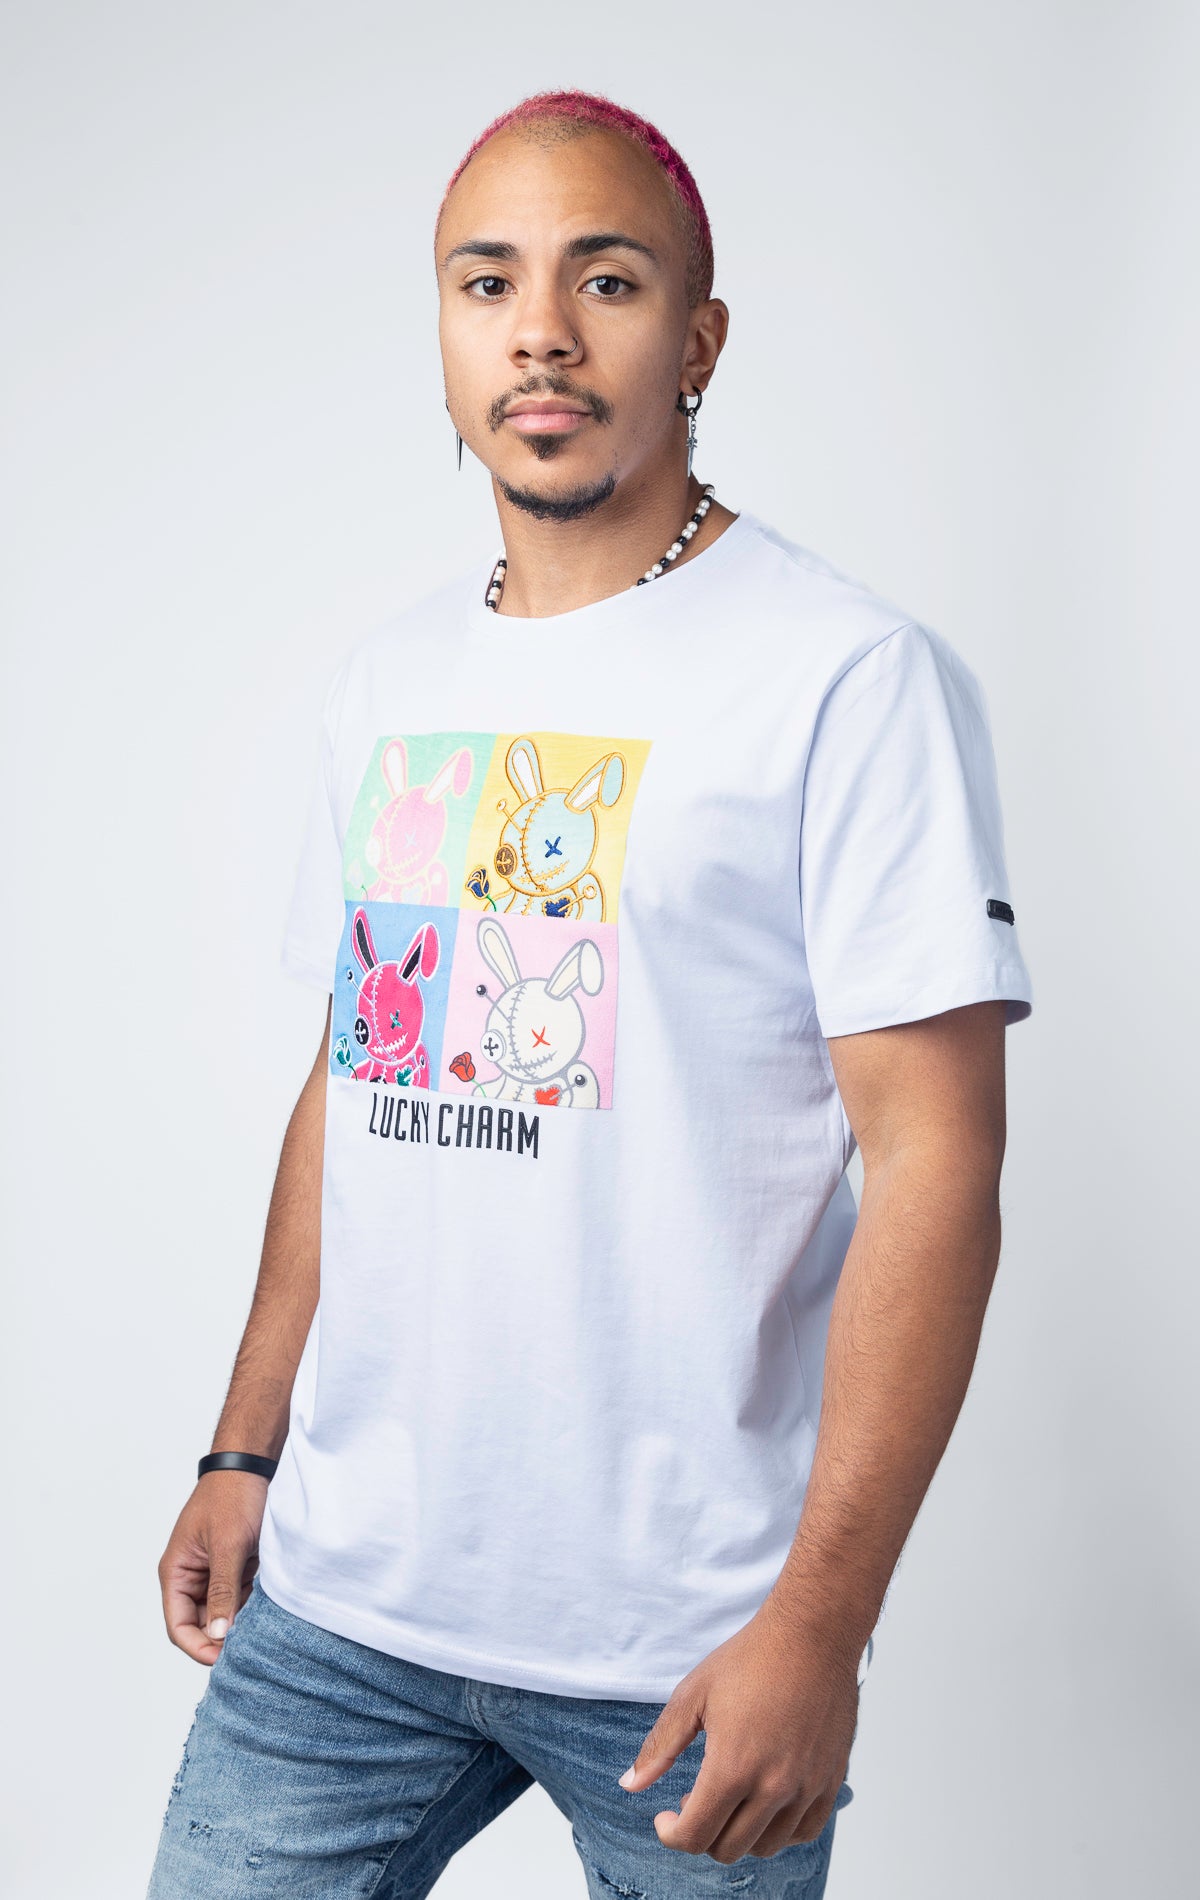 White T-shirt featuring the iconic Lucky Charm Bunny in an Andy Warhol-inspired graphic.